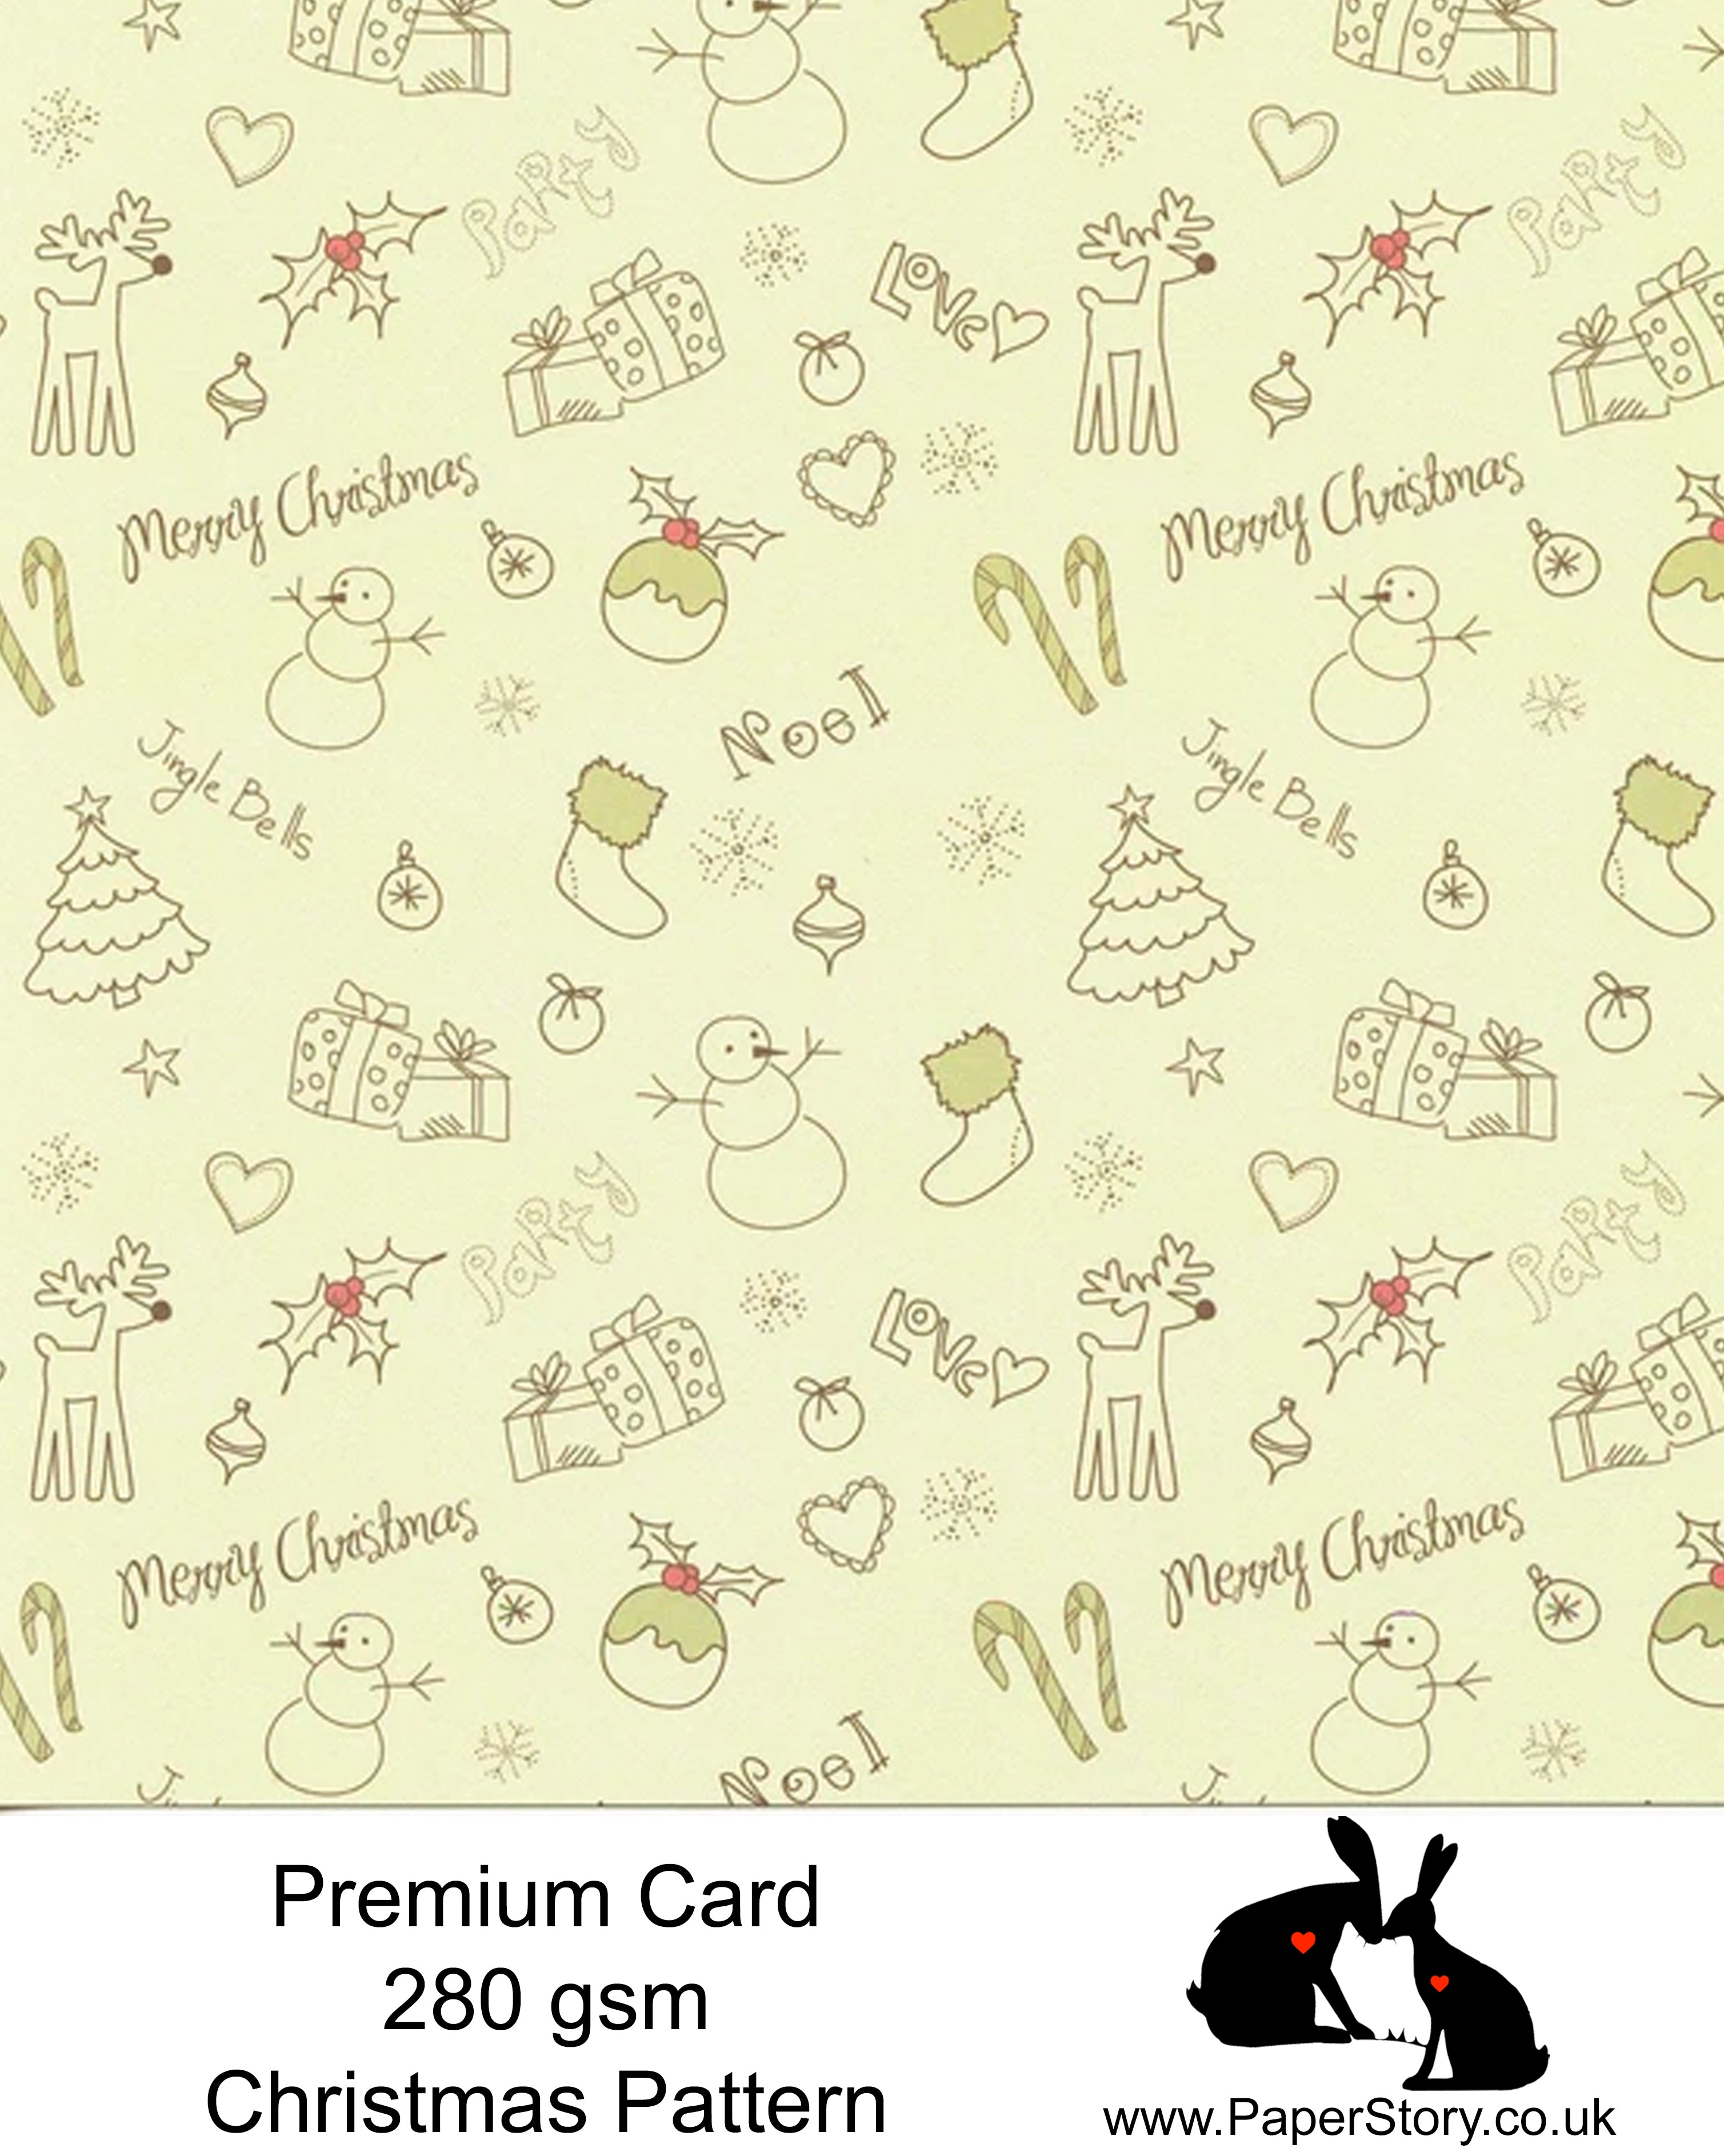 A4 Smooth card 280 gsm Single sided, Christmas pattern. Smooth card, perfect for crafting and card making. Cute repeating pattern, white other side